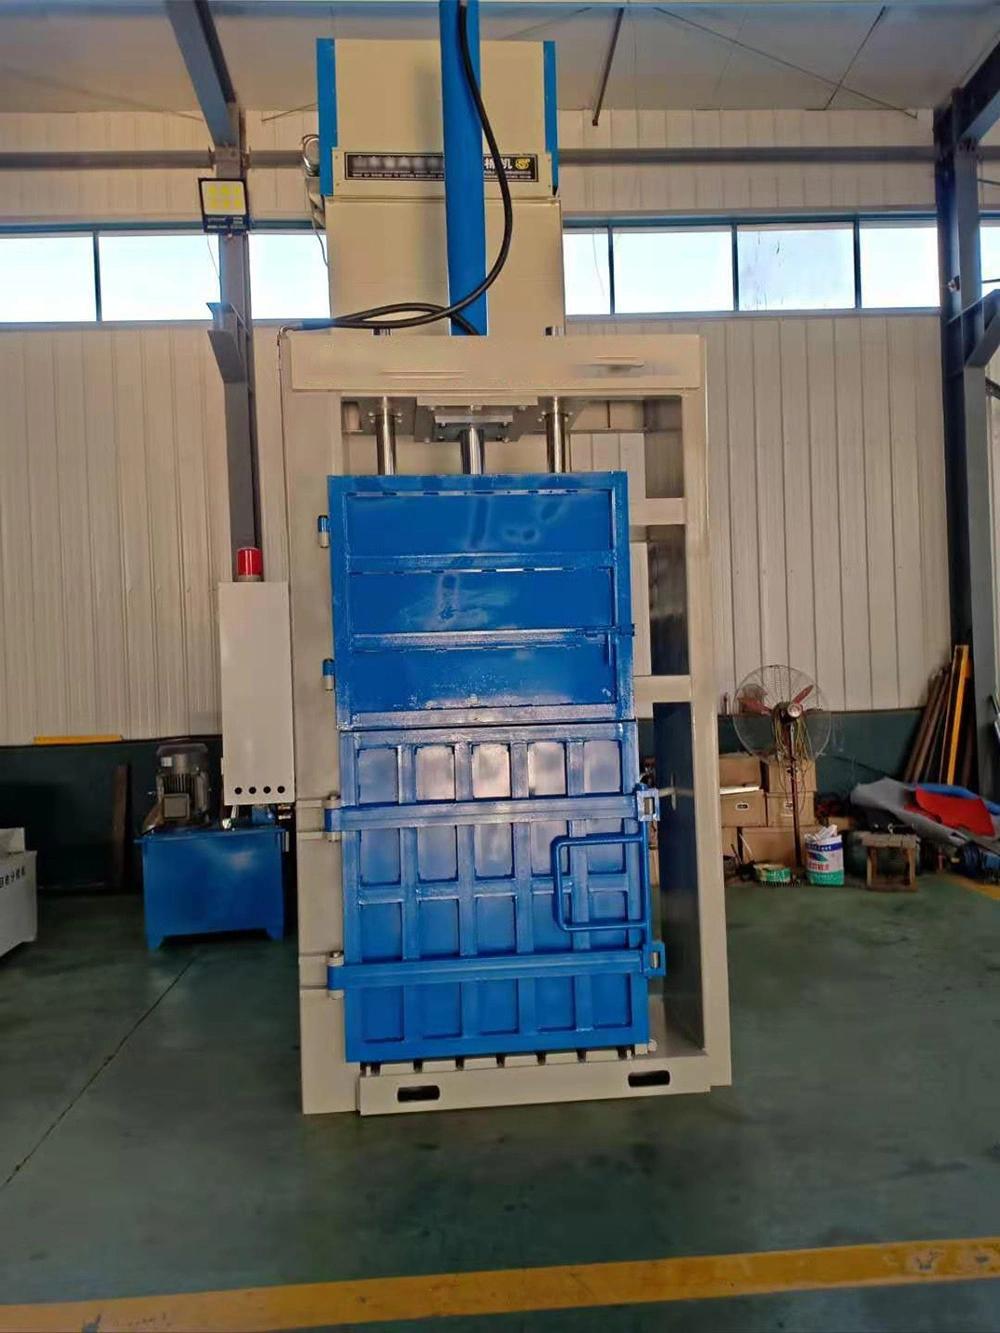 High-Strength and High-Quality Waste Paper Automatic Baler, Waste Paper Box, Corrugated Box, Plastic Film, etc. Automatic Baler